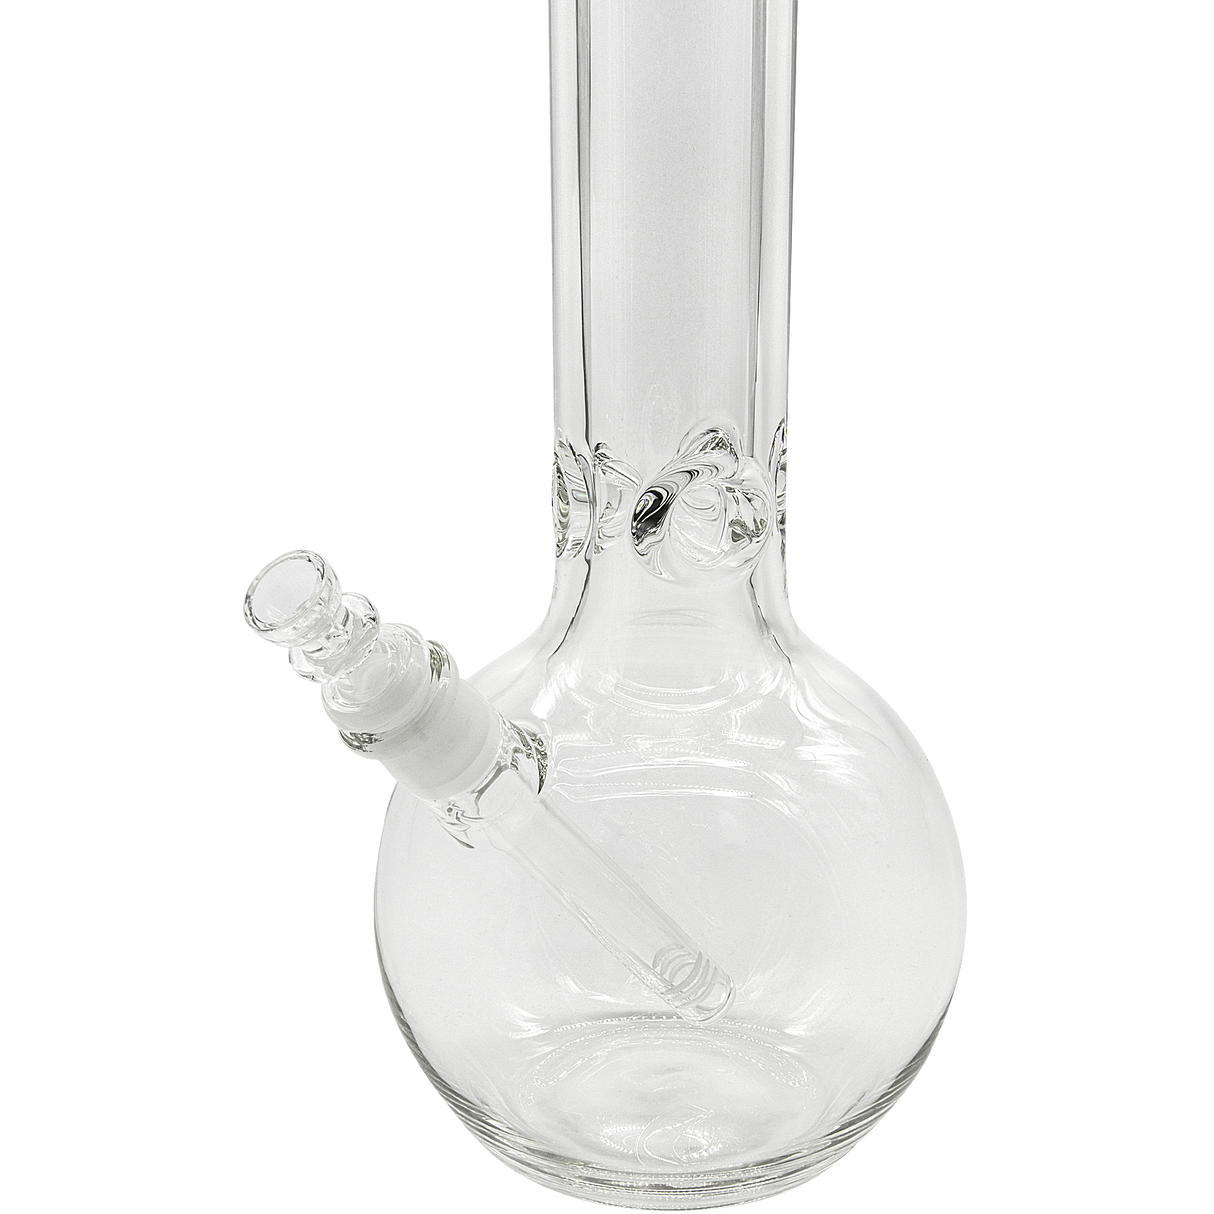 LA Pipes "Iron Mace" 9mm Thick Glass Bubble Bong with 45 Degree Joint - Front View